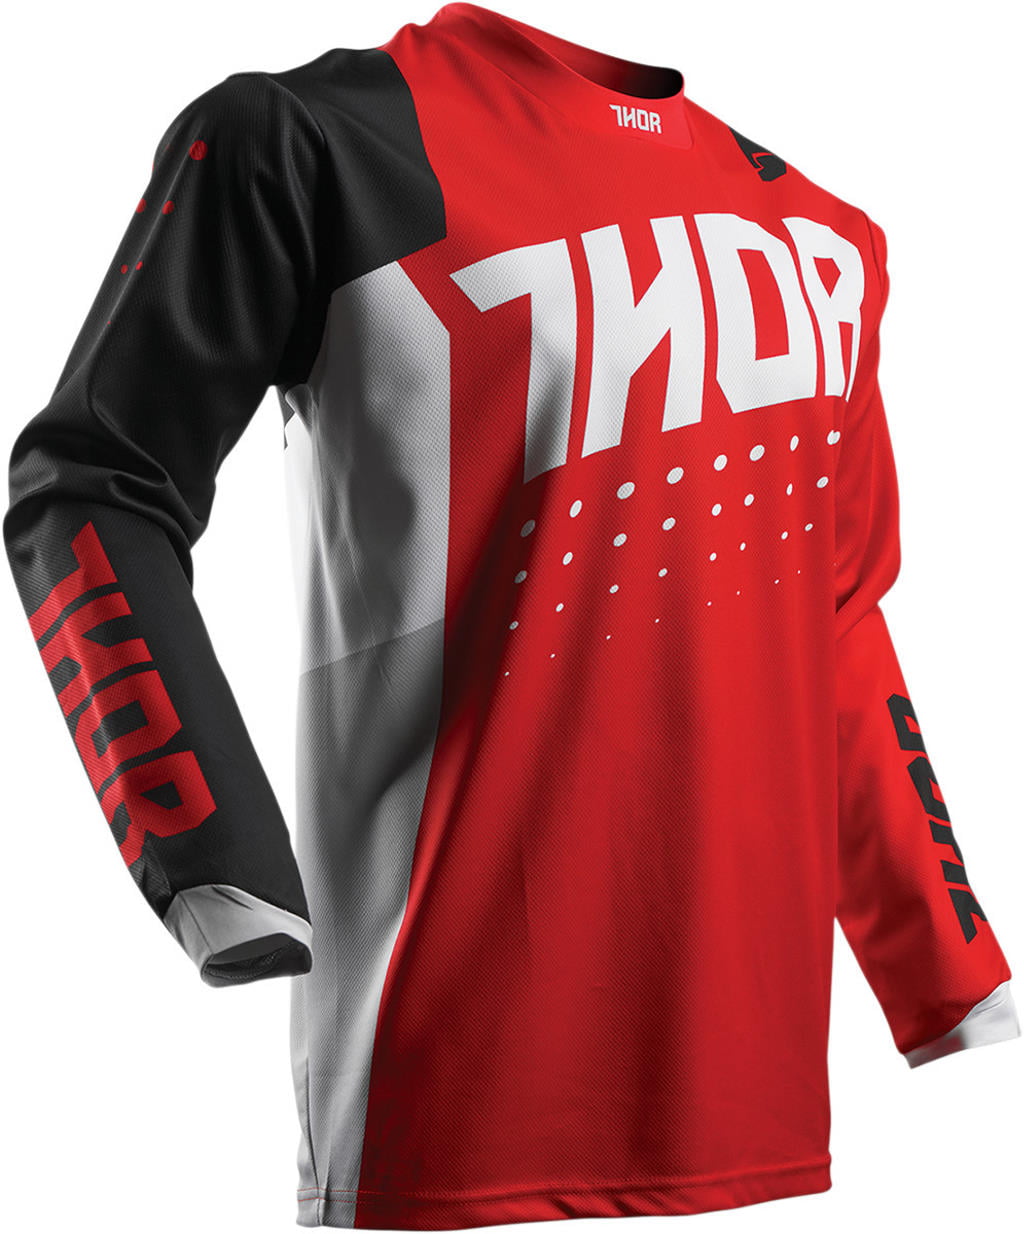 Thor Riding Race MX Motocross Youth Jersey S7Y Pulse Aktiv White/Black Small 